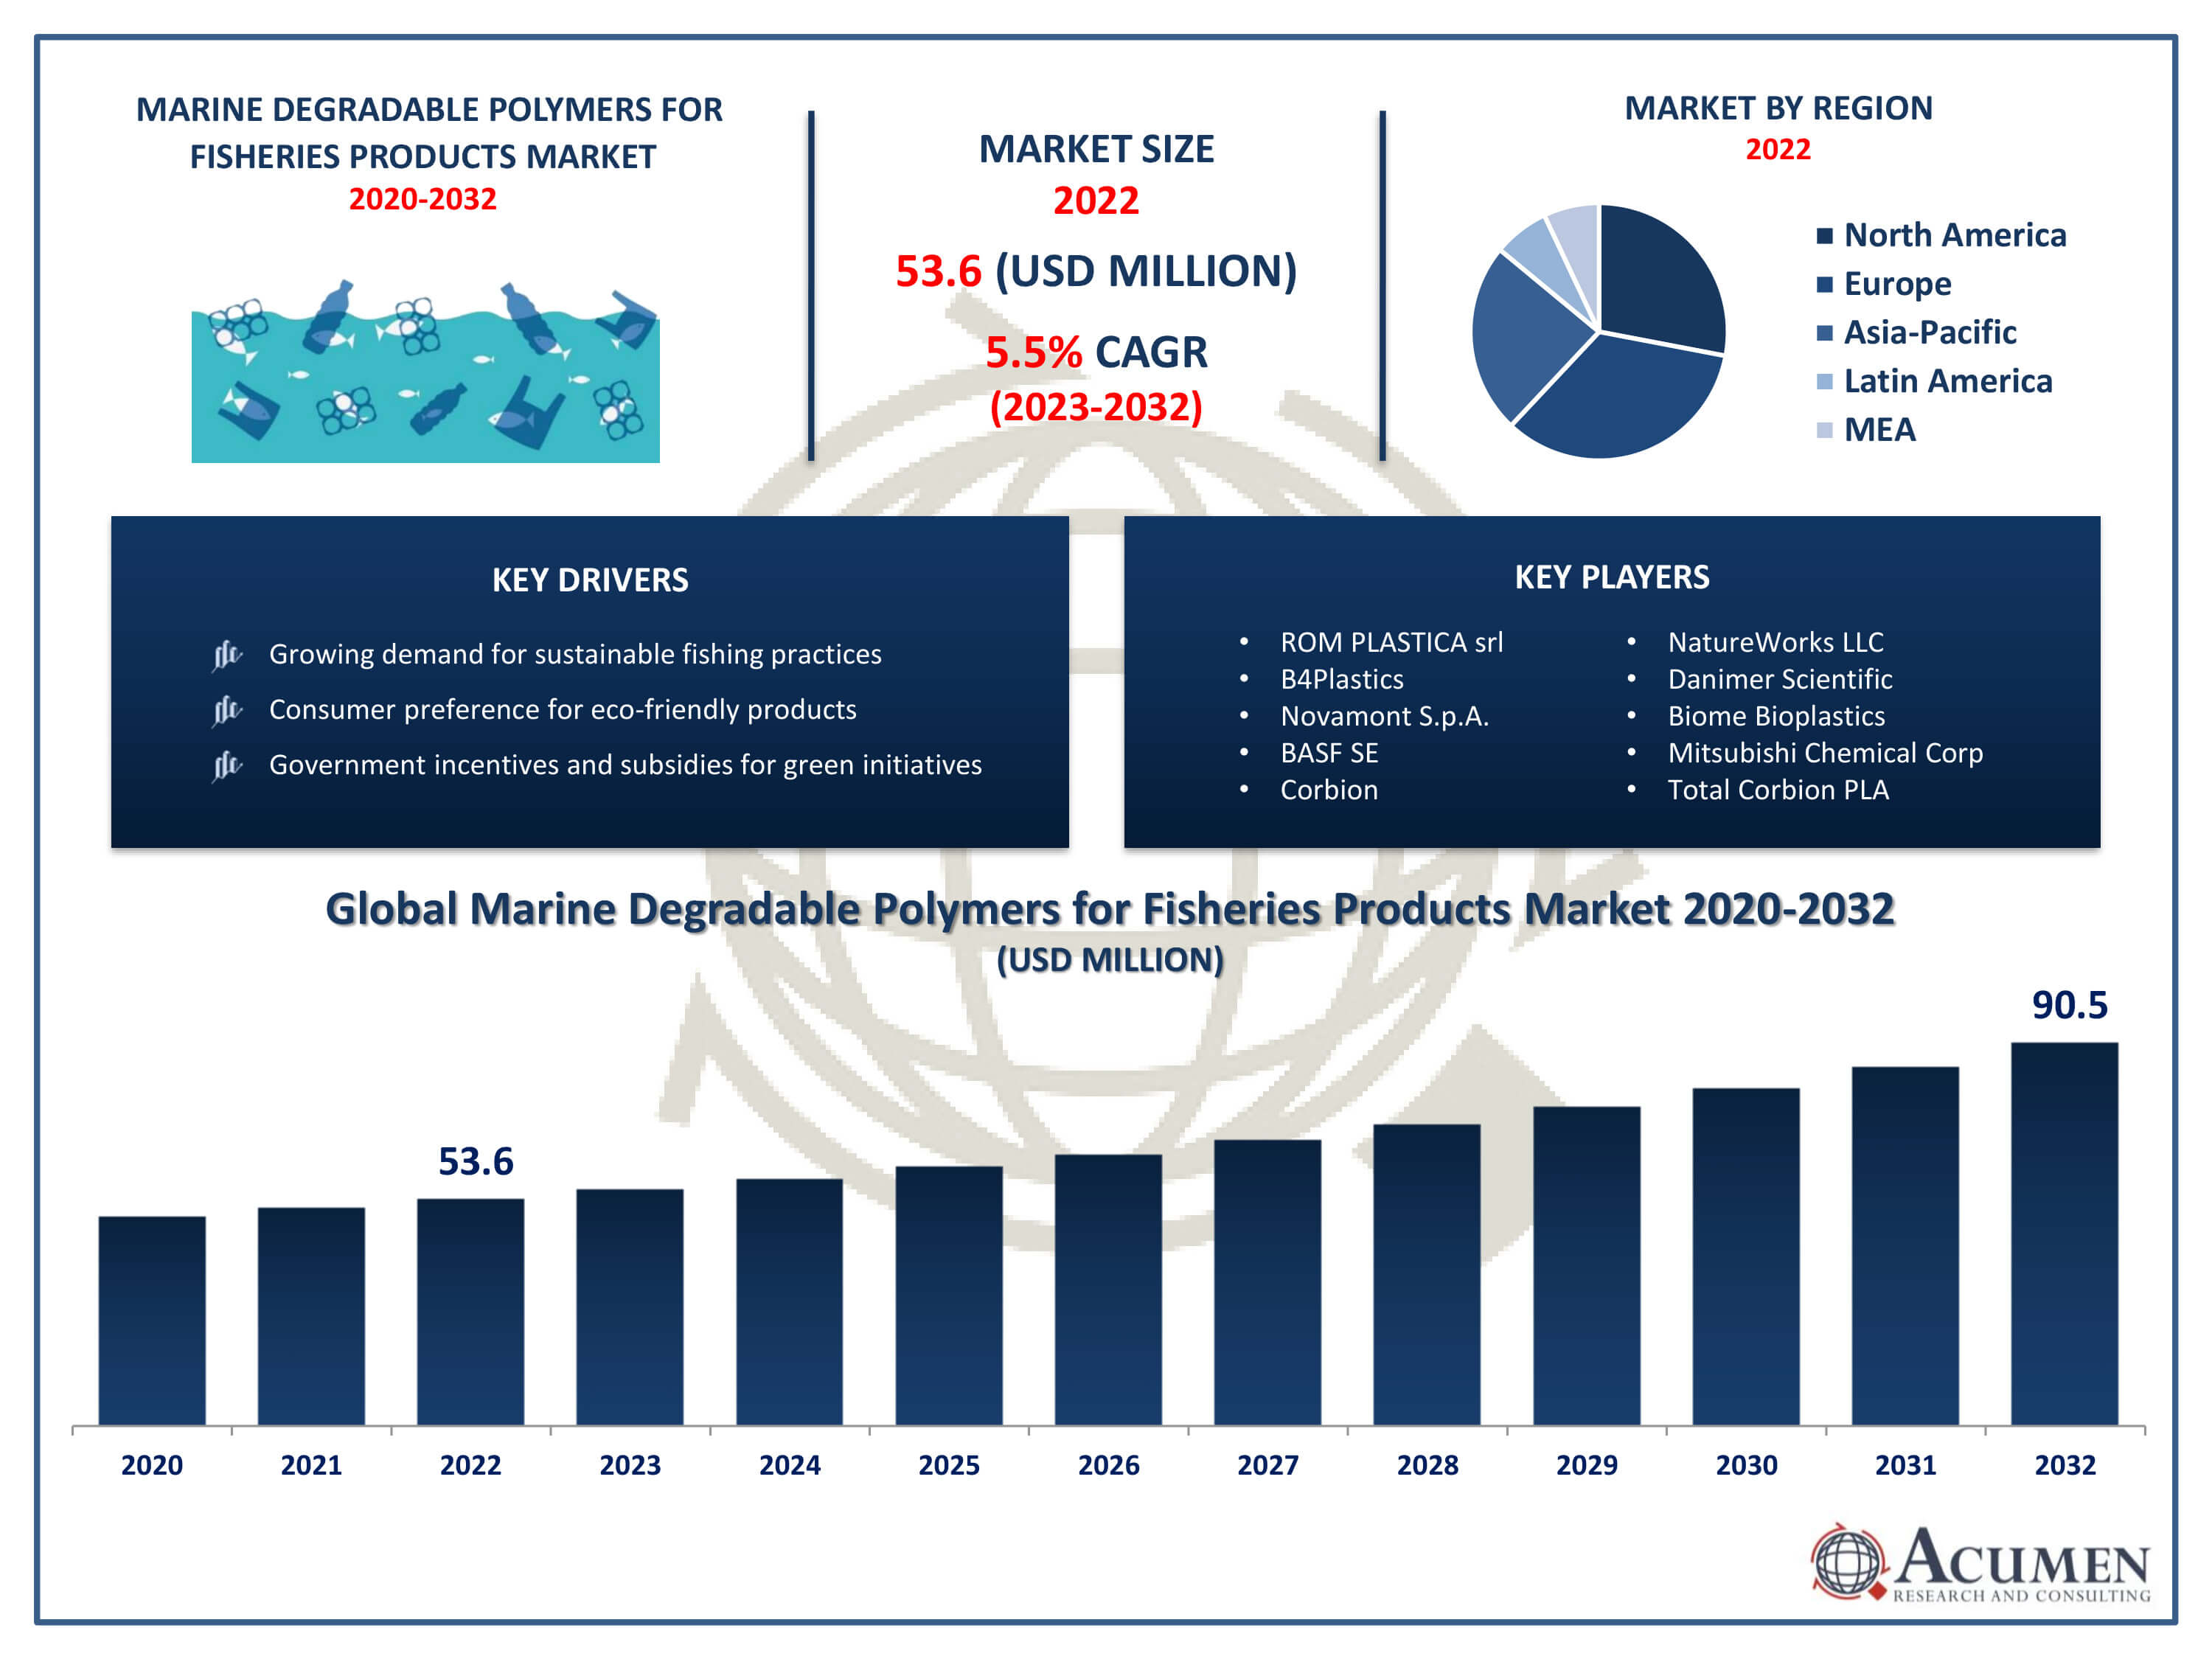 Marine Degradable Polymers for Fisheries Products Market Trends